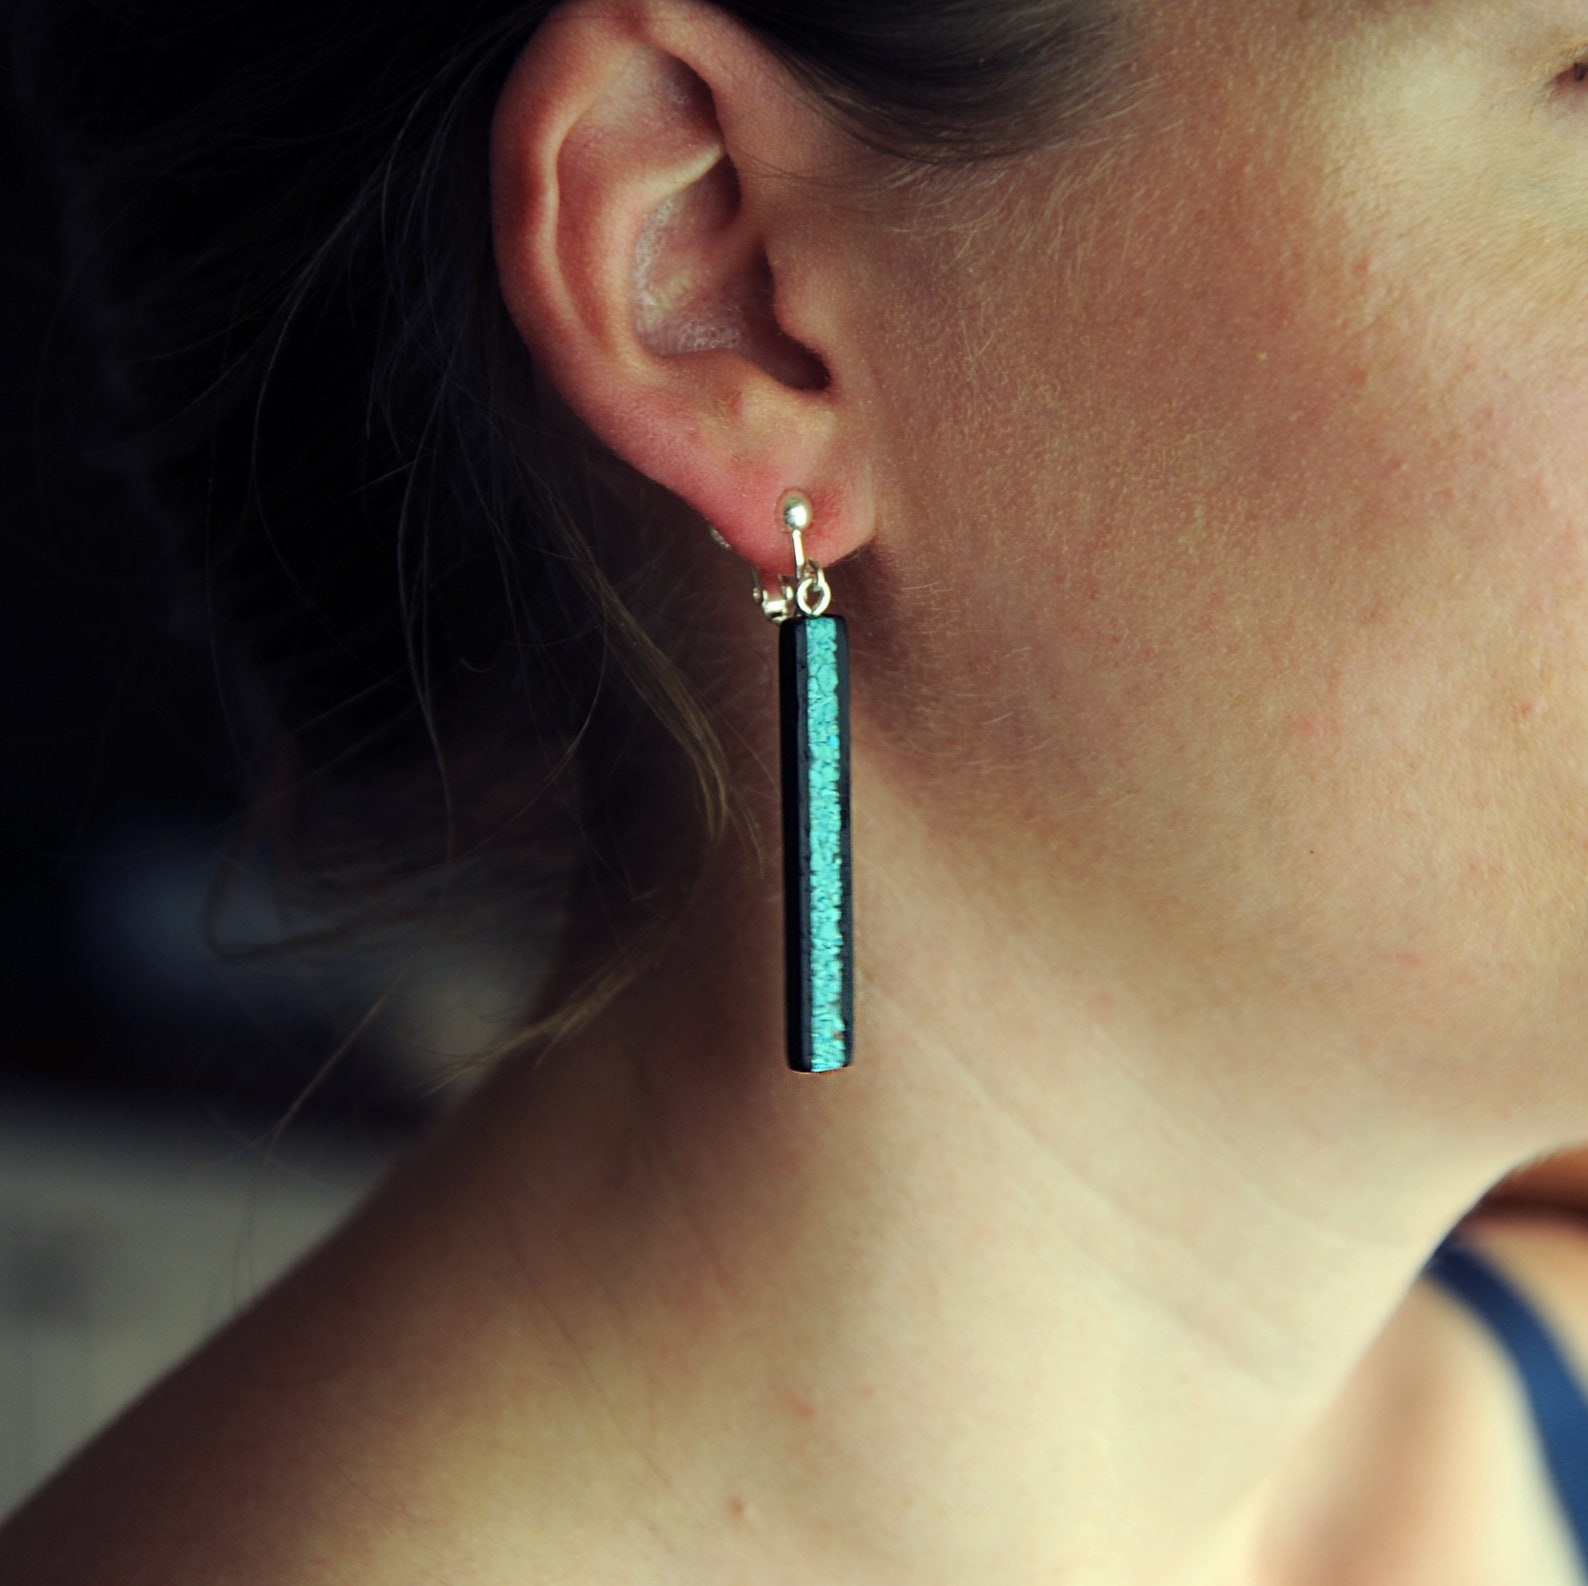 A person wearing the turquoise earrings.